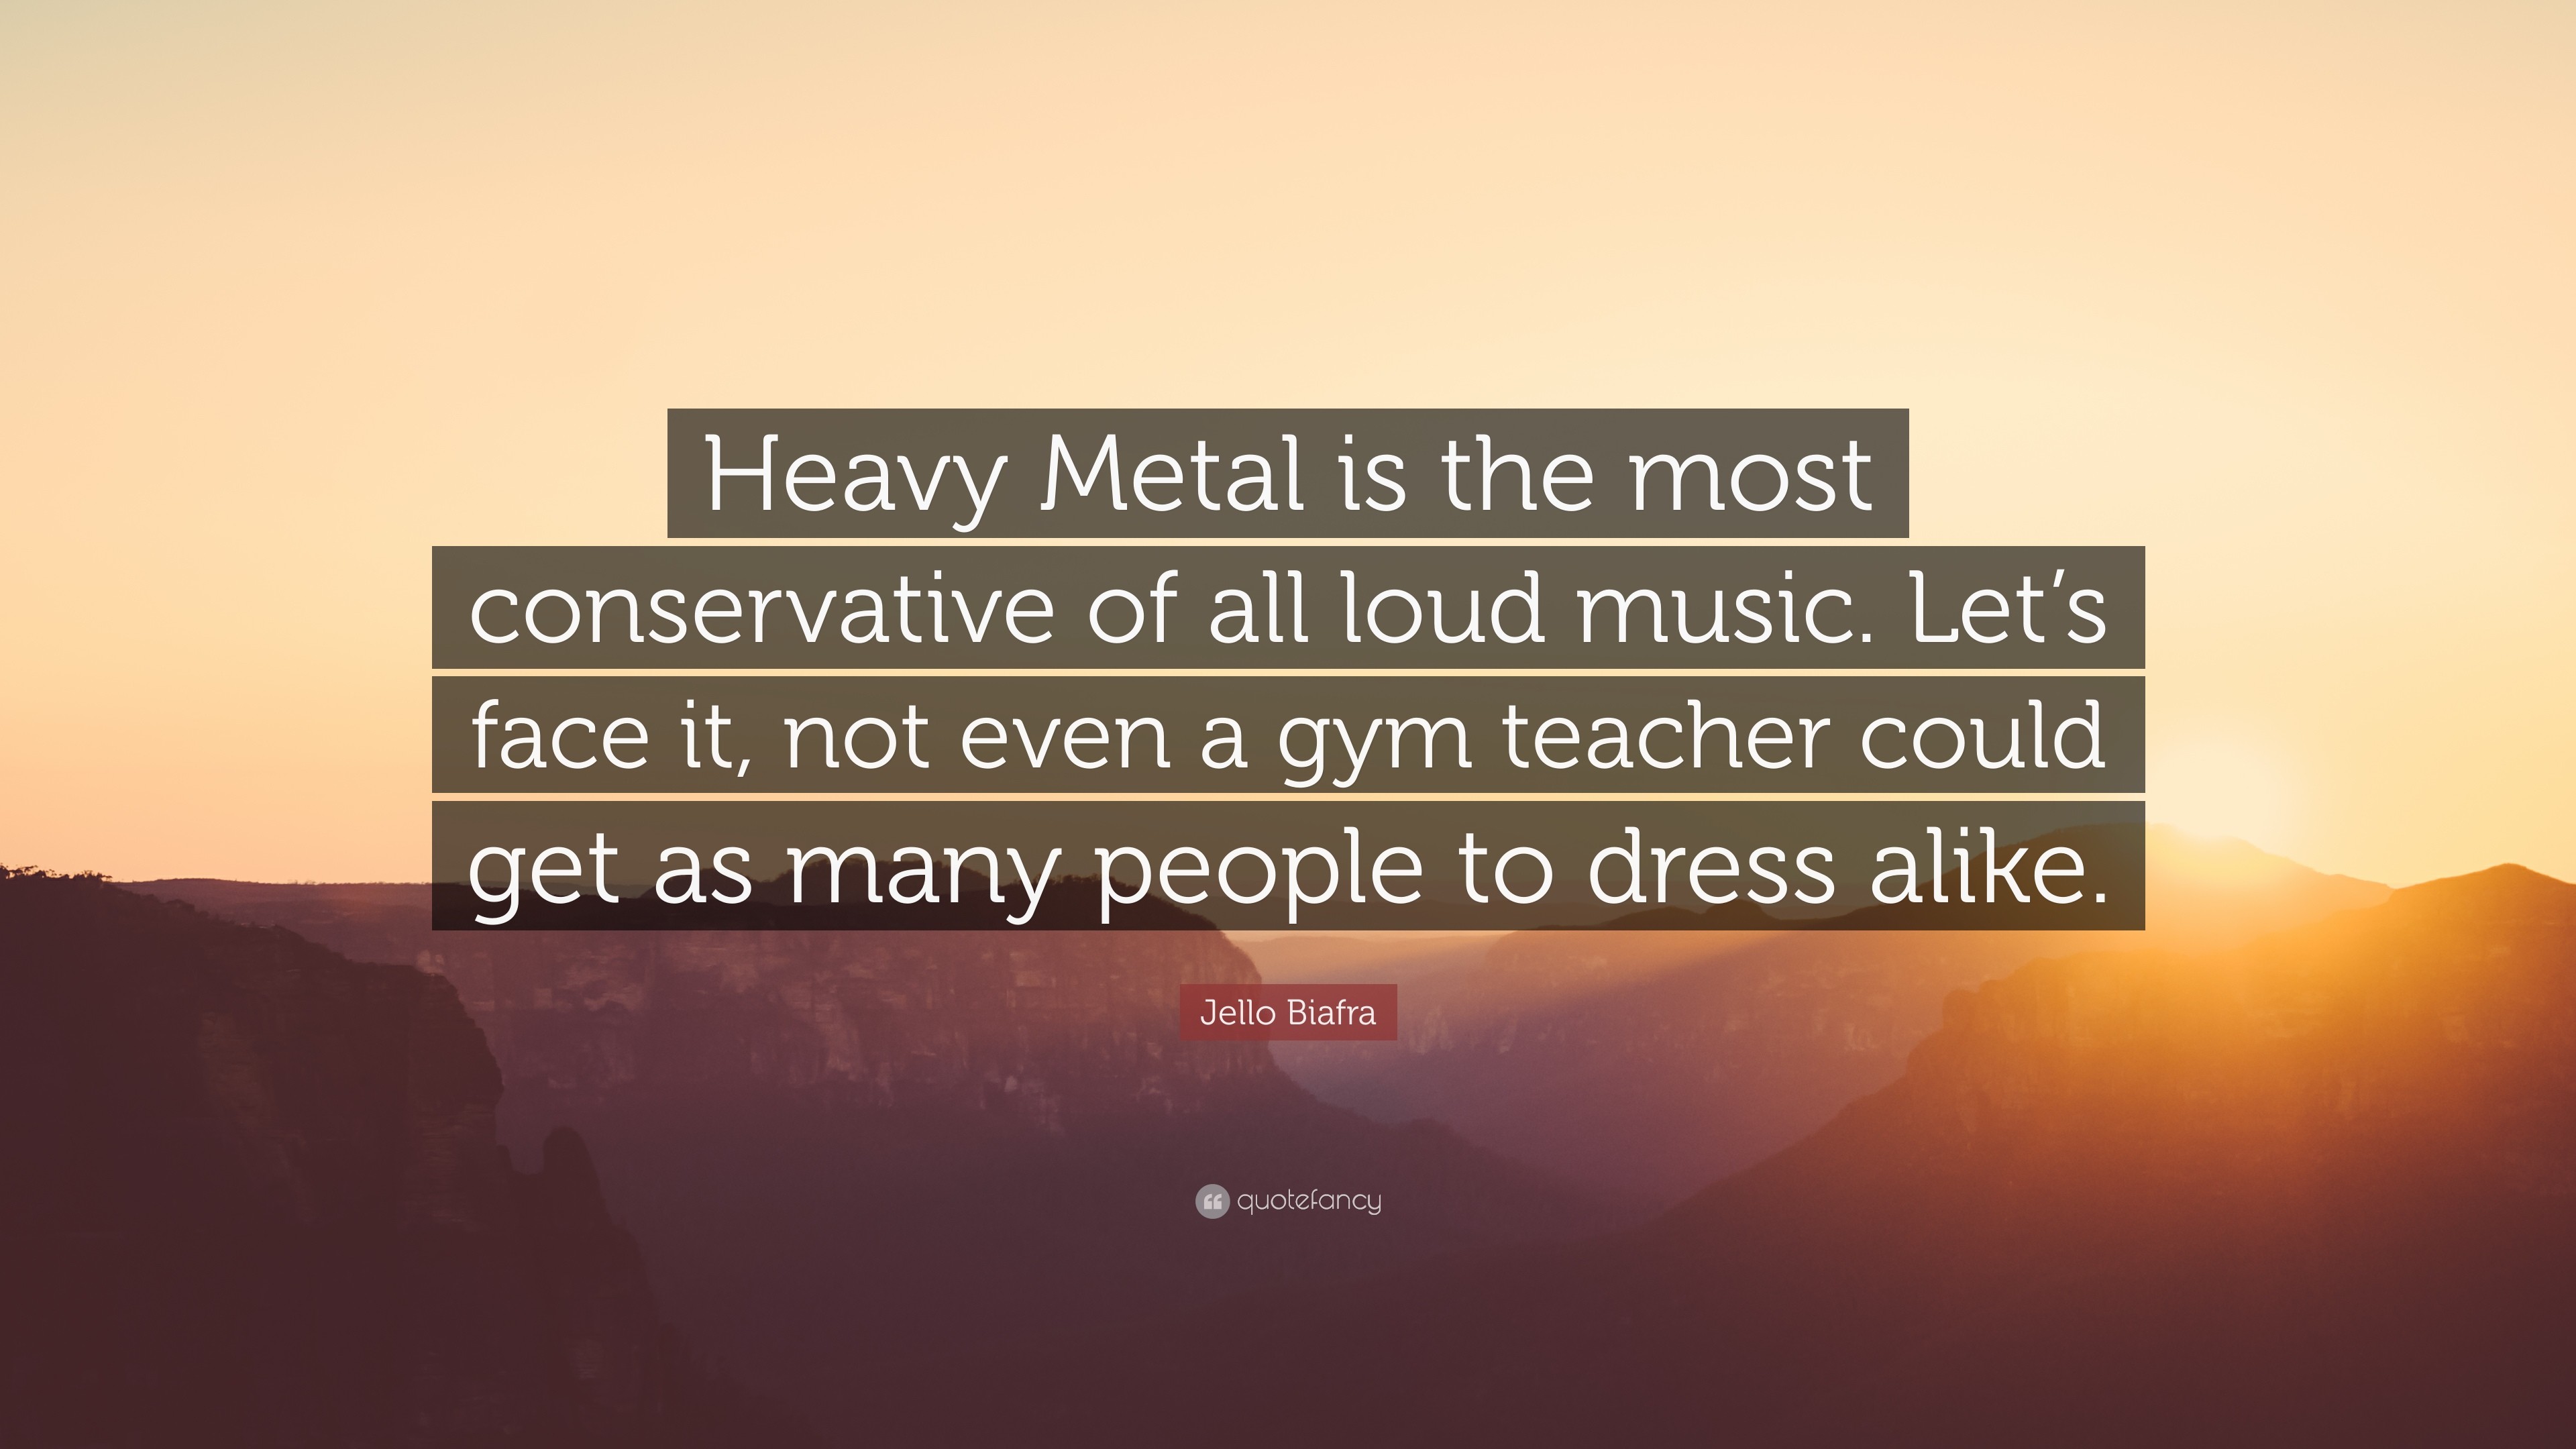 3840x2160 Jello Biafra Quote: “Heavy Metal is the most conservative of all loud music.